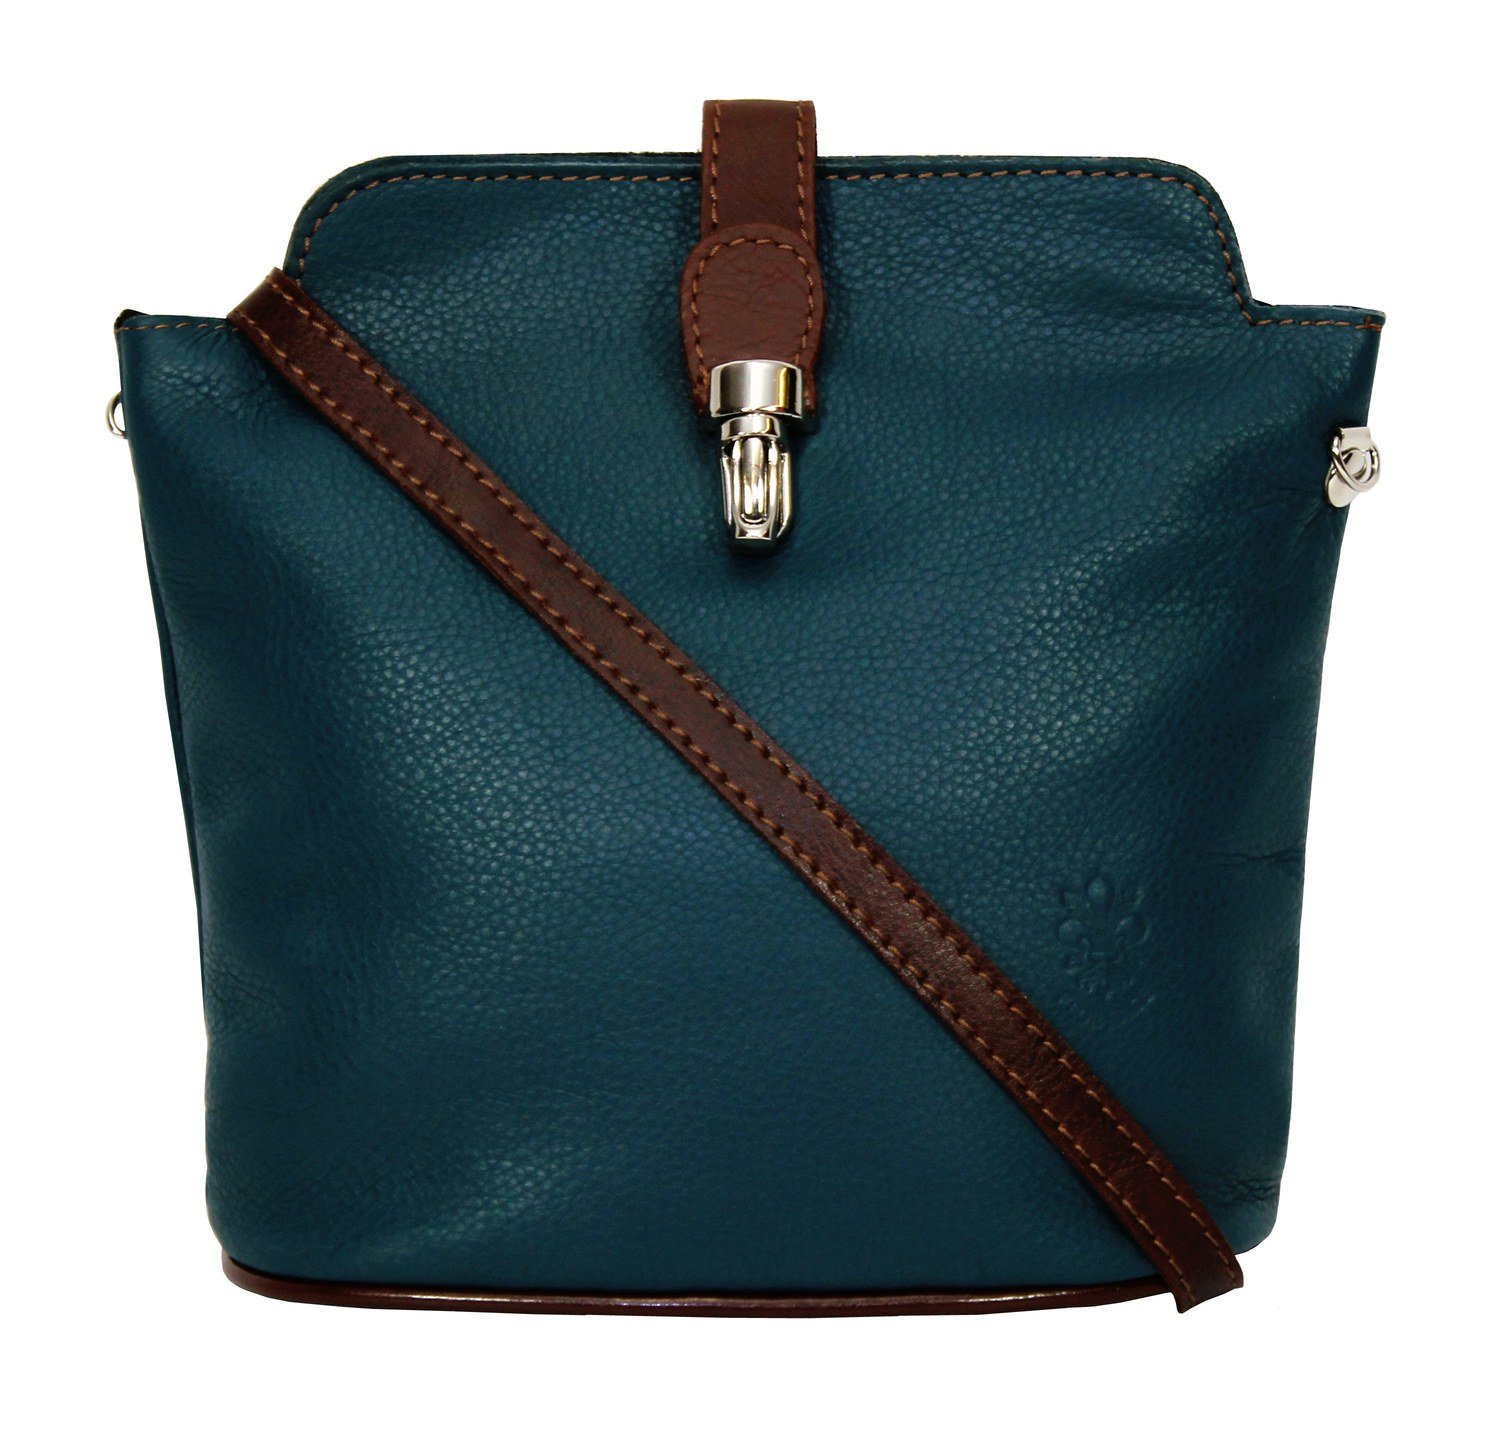 Teal Body With Dark Tan Trim Soft Leather Clip Bag 